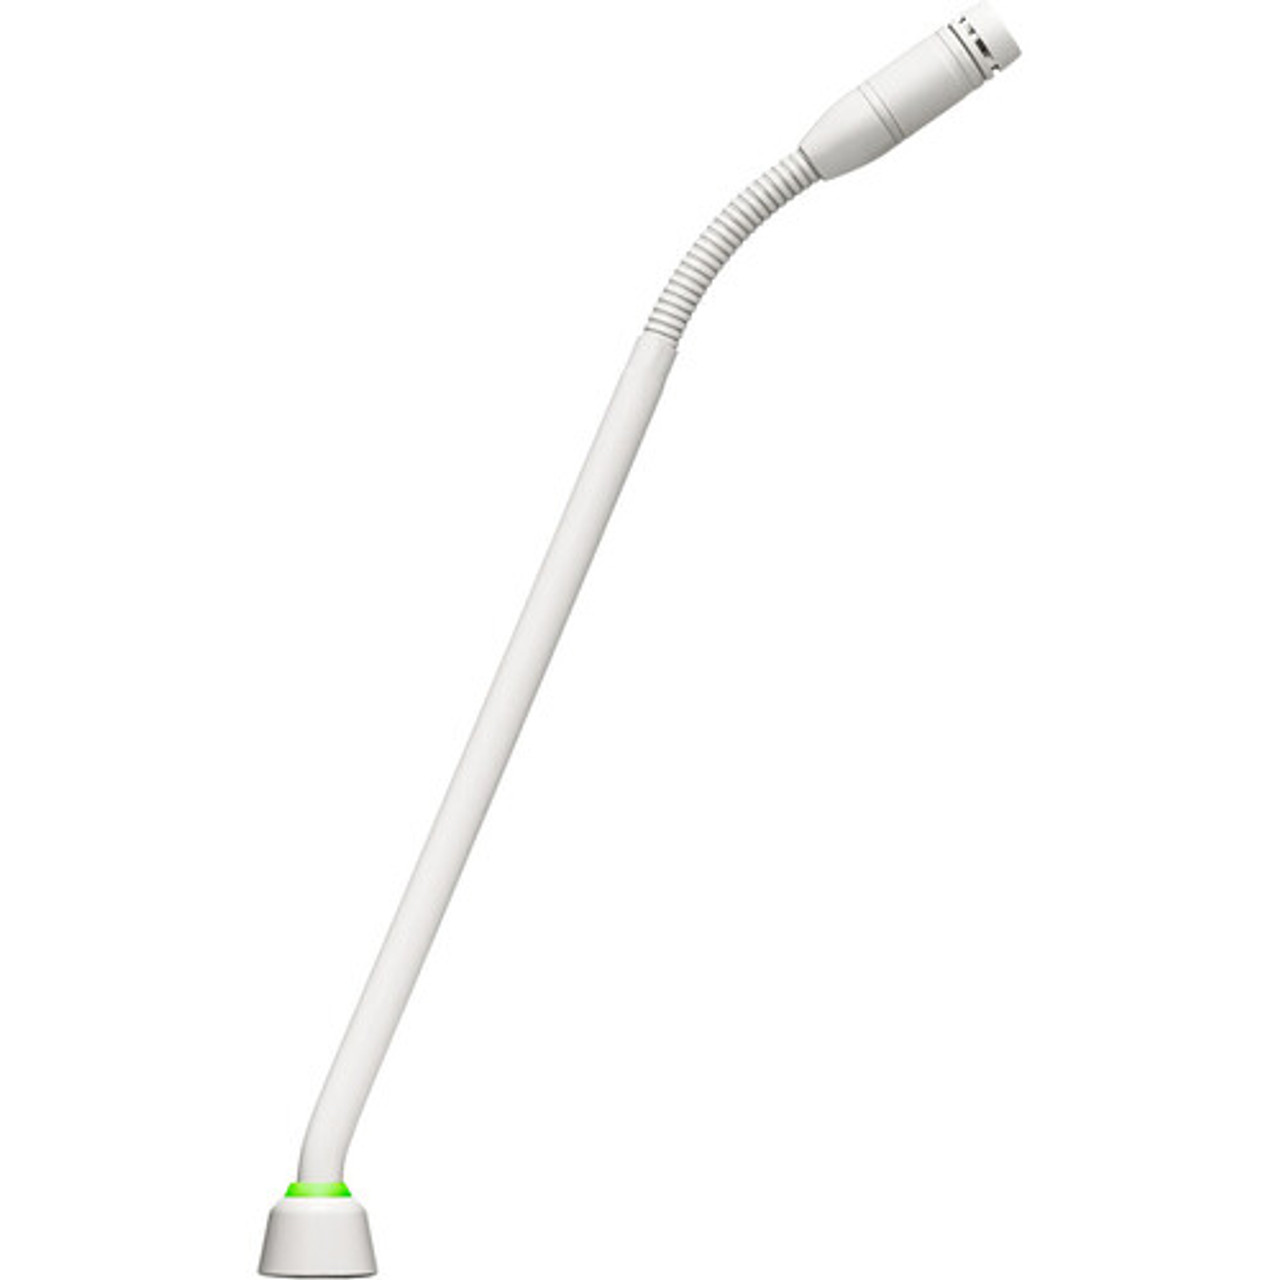 Shure MX410WLP/C-VBDL Gooseneck Mic with Cardioid Capsule, No Preamp, and 2-Color LED Ring on Bottom (White) (MX410WLP/C-VBDL)